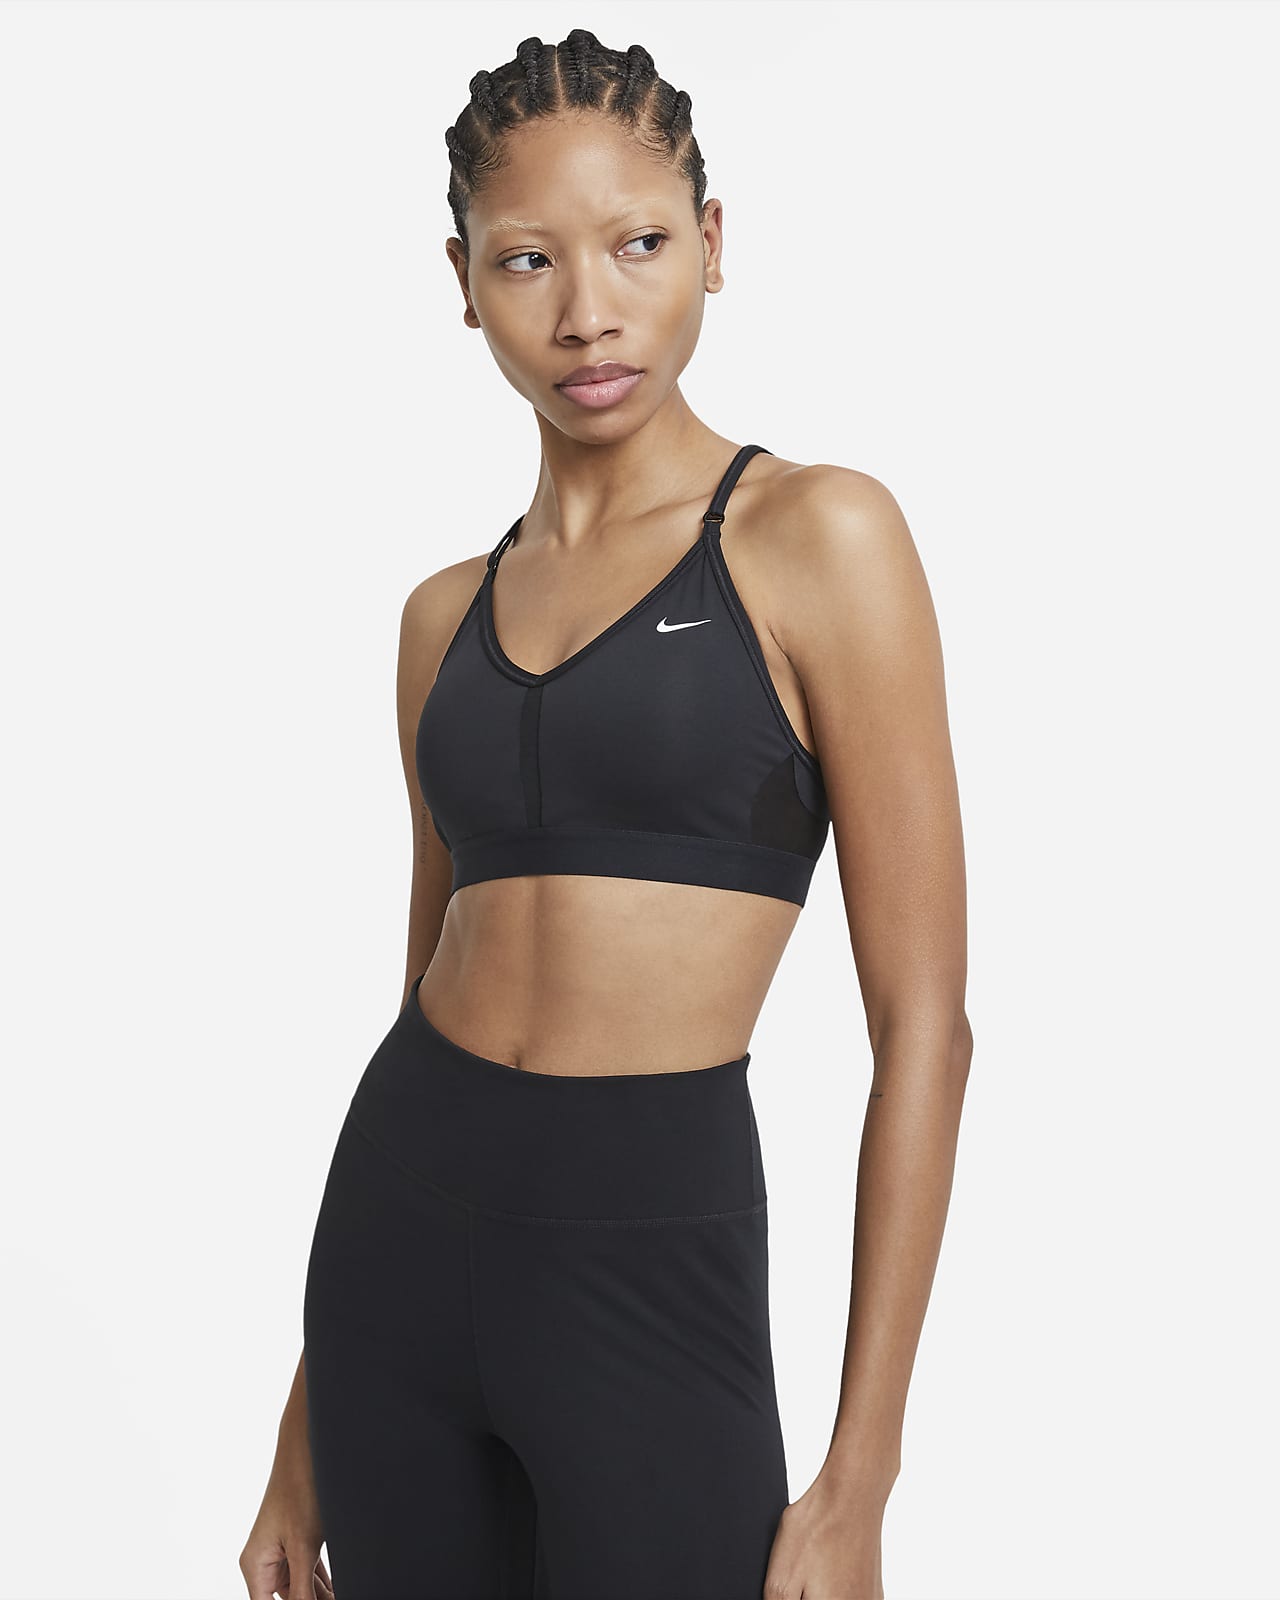 Intolerable Dictado Respecto a Nike Indy Women's Light-Support Padded V-Neck Sports Bra. Nike.com